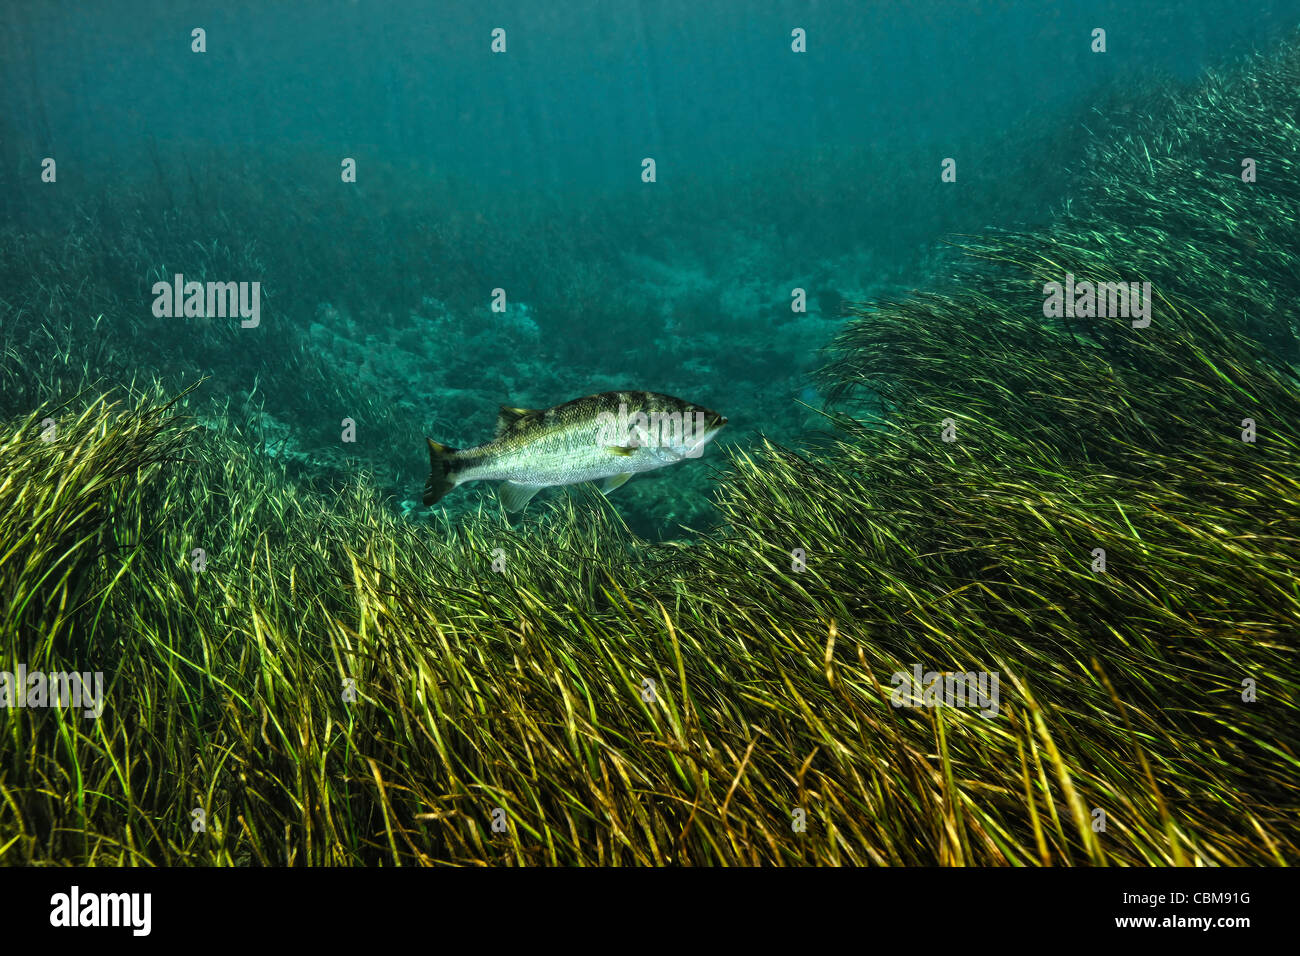 A Largemouth Bass swims amongst Strap-leaf sagittaria on the river bottom. Stock Photo